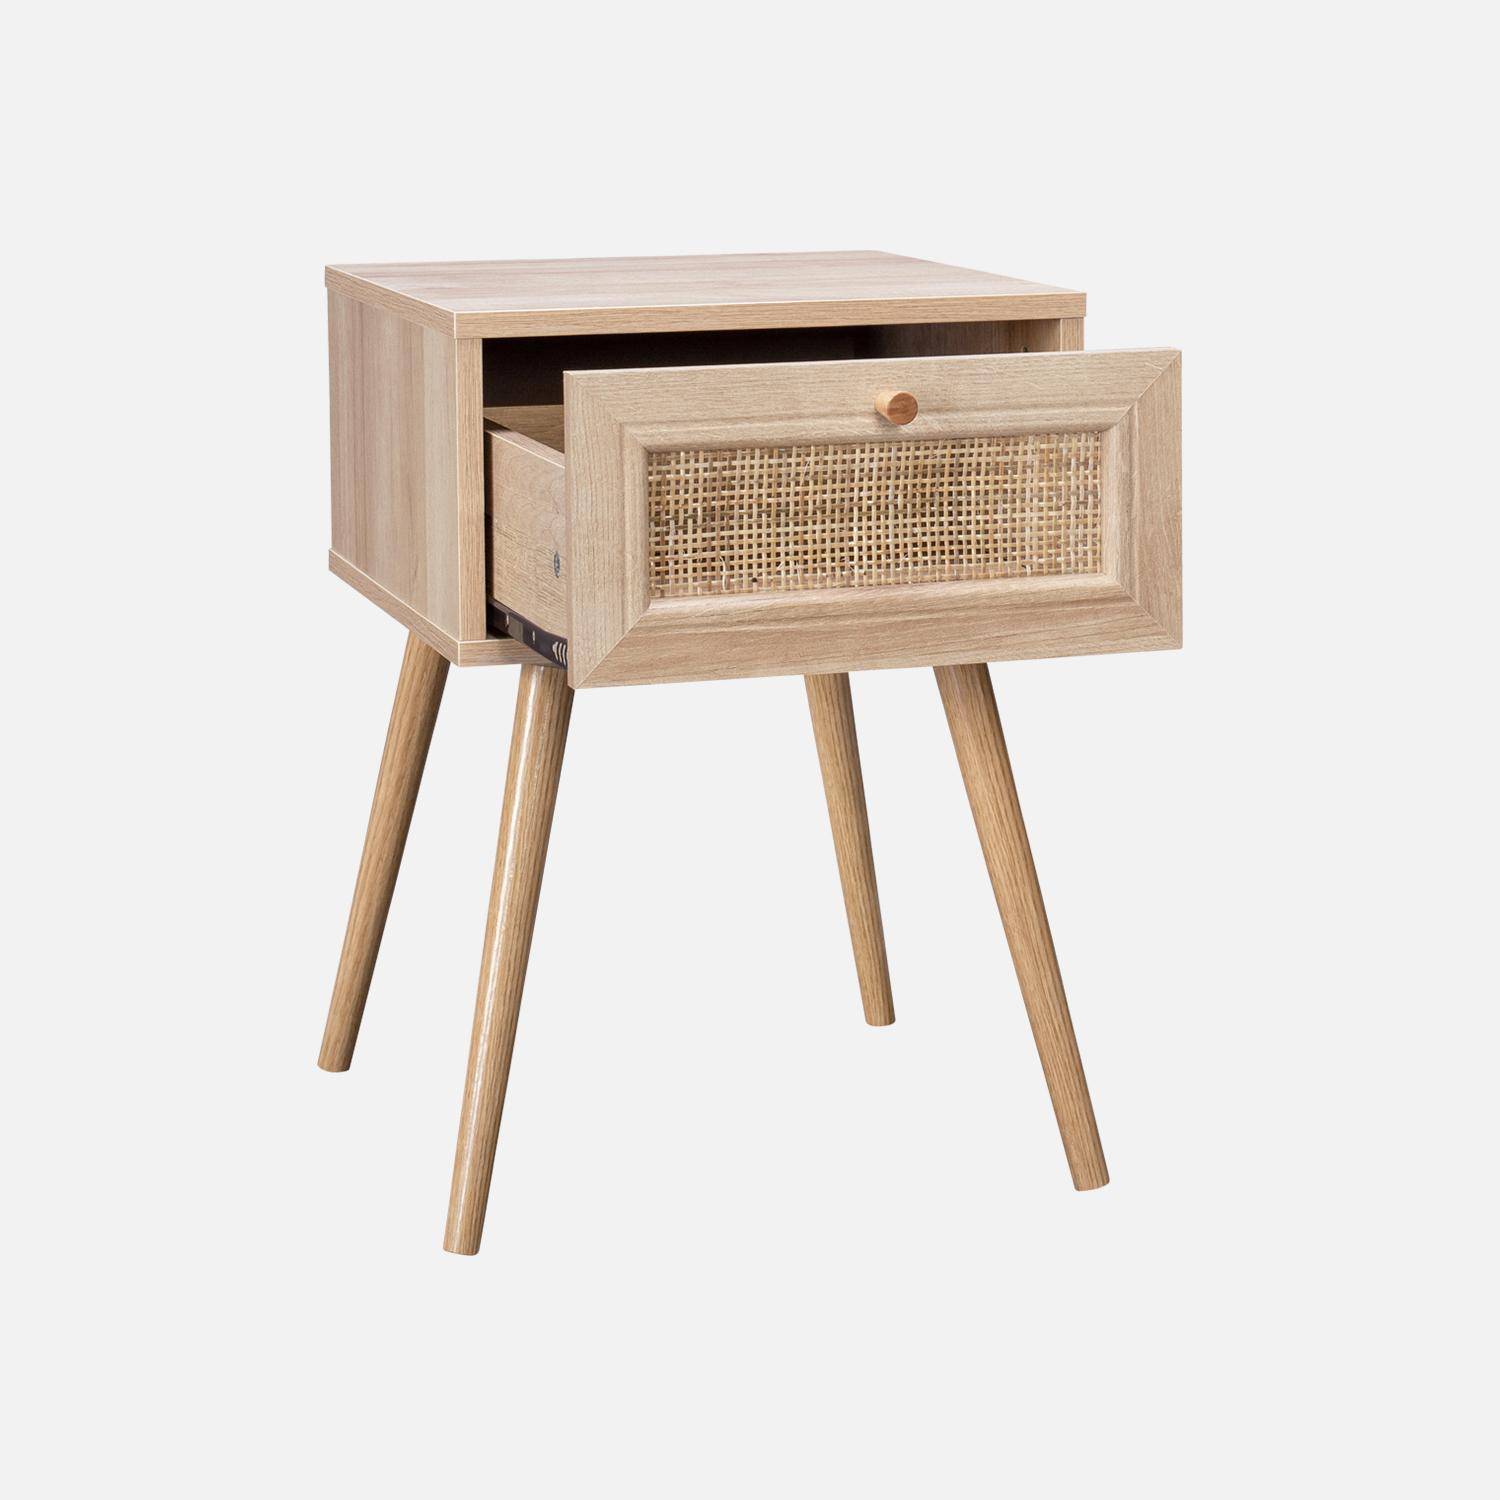 Pair of woven rattan bedside tables with drawer, 39x39x55.4cm - Boheme - Natural Wood colour Photo6